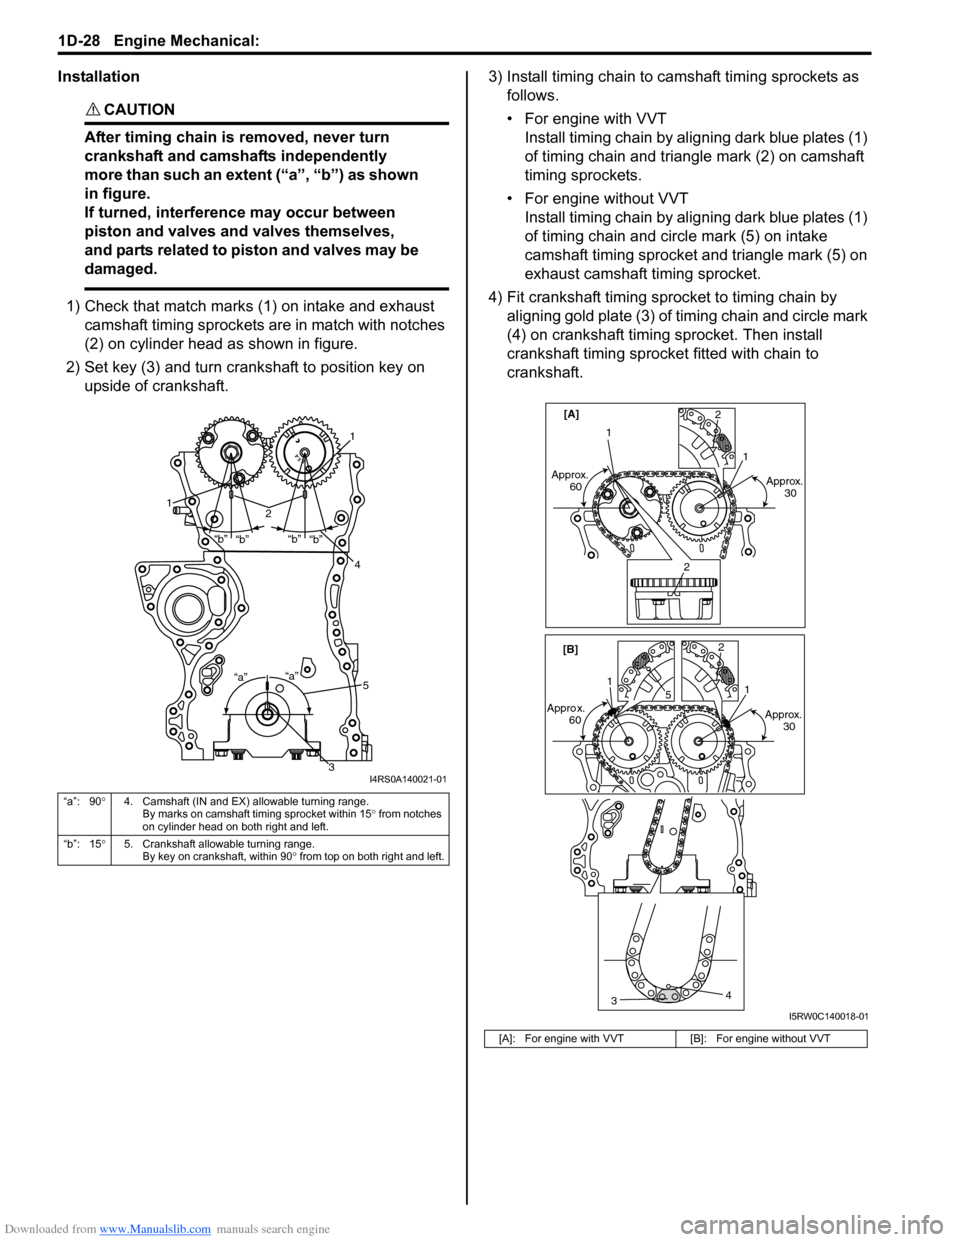 SUZUKI SX4 2006 1.G Service Workshop Manual Downloaded from www.Manualslib.com manuals search engine 1D-28 Engine Mechanical: 
Installation
CAUTION! 
After timing chain is removed, never turn 
crankshaft and camshafts independently 
more than s